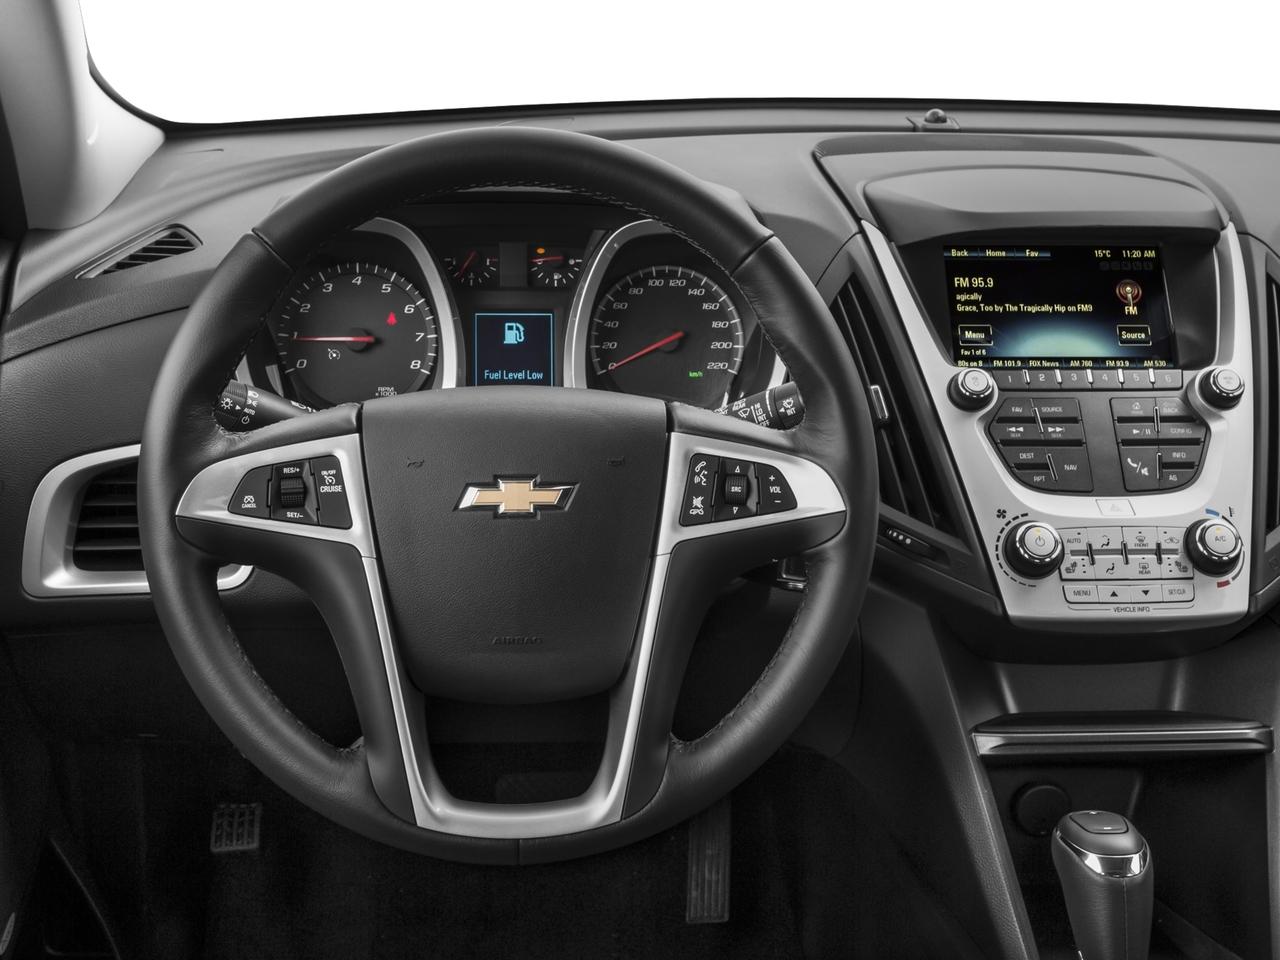 2017 Chevrolet Equinox Vehicle Photo in ELYRIA, OH 44035-6349